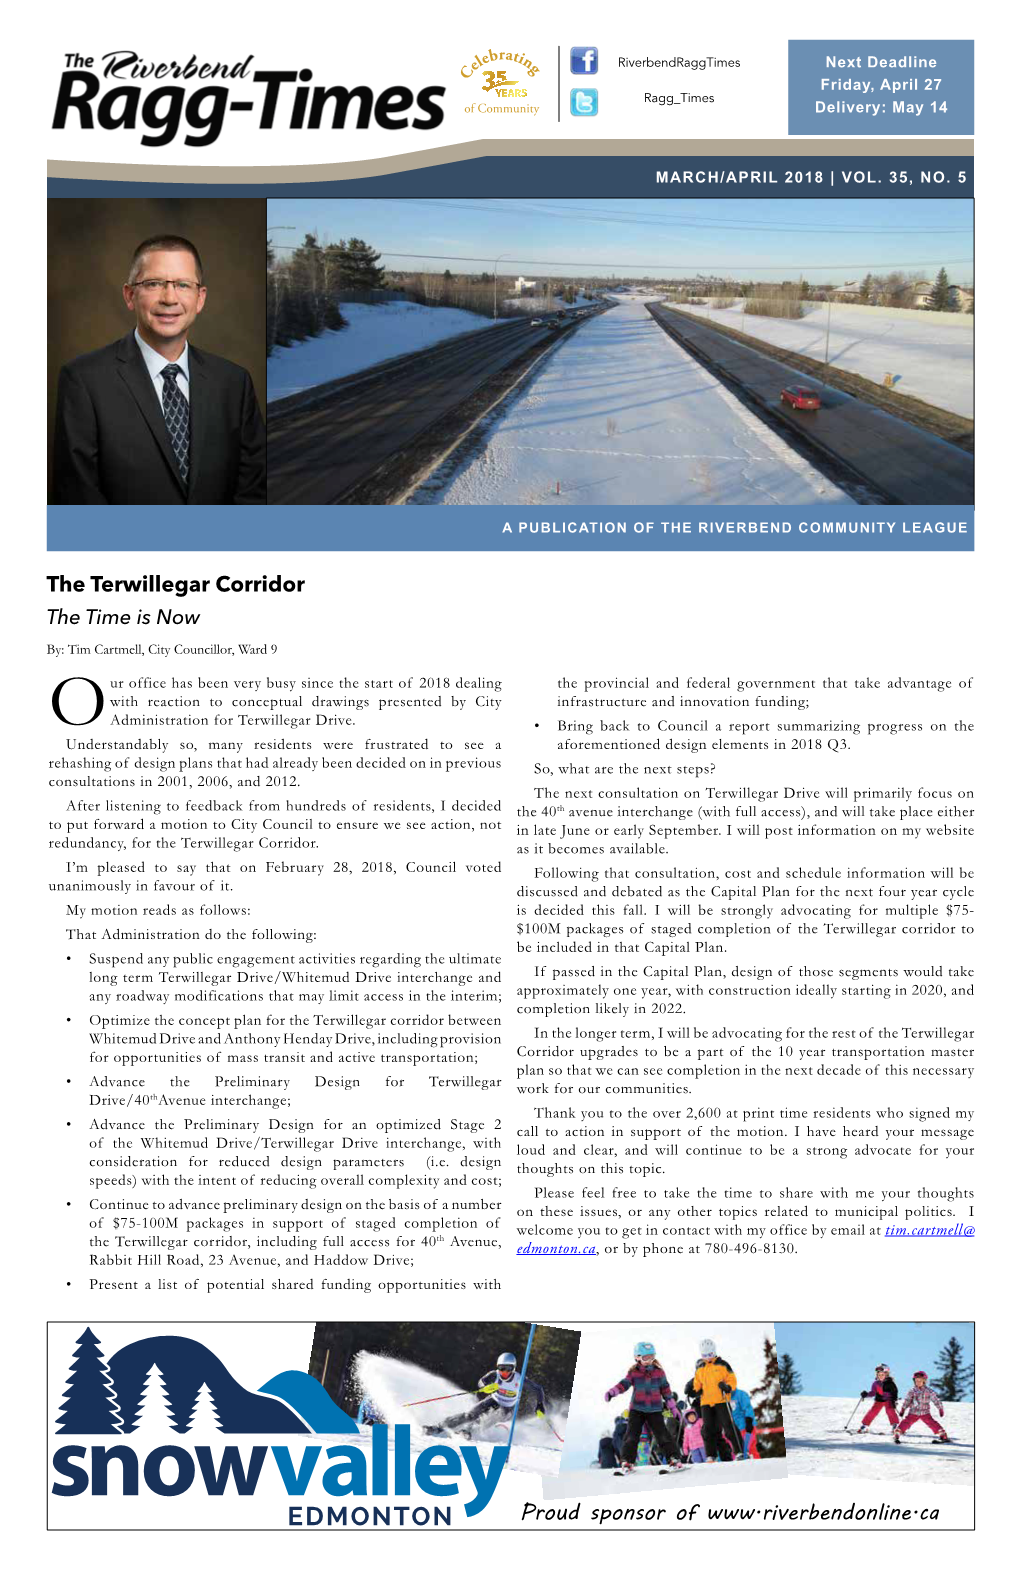 The Terwillegar Corridor the Time Is Now By: Tim Cartmell, City Councillor, Ward 9